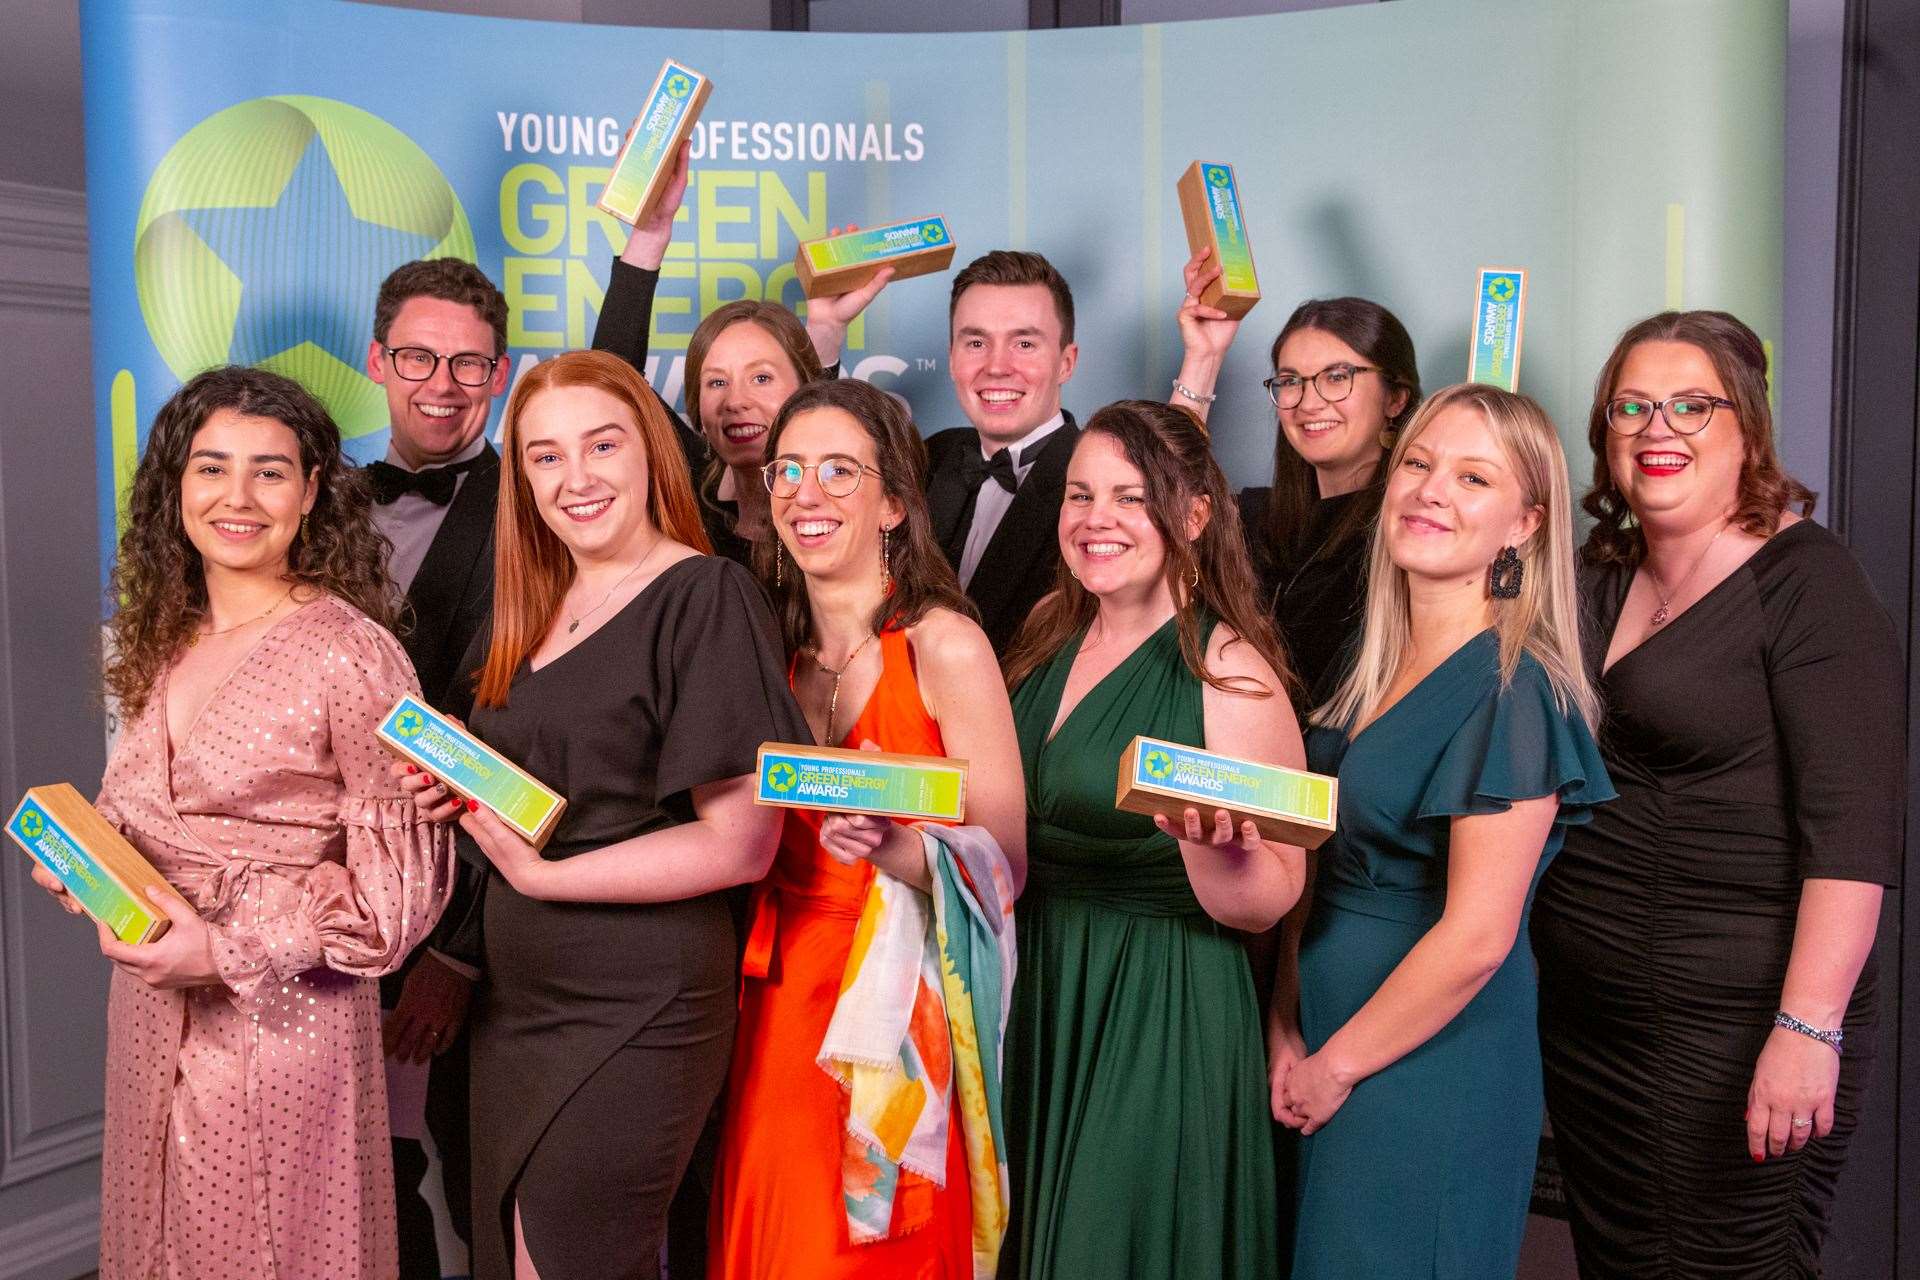 This year's Young Professionals Green Energy Award winners celebrate their success.